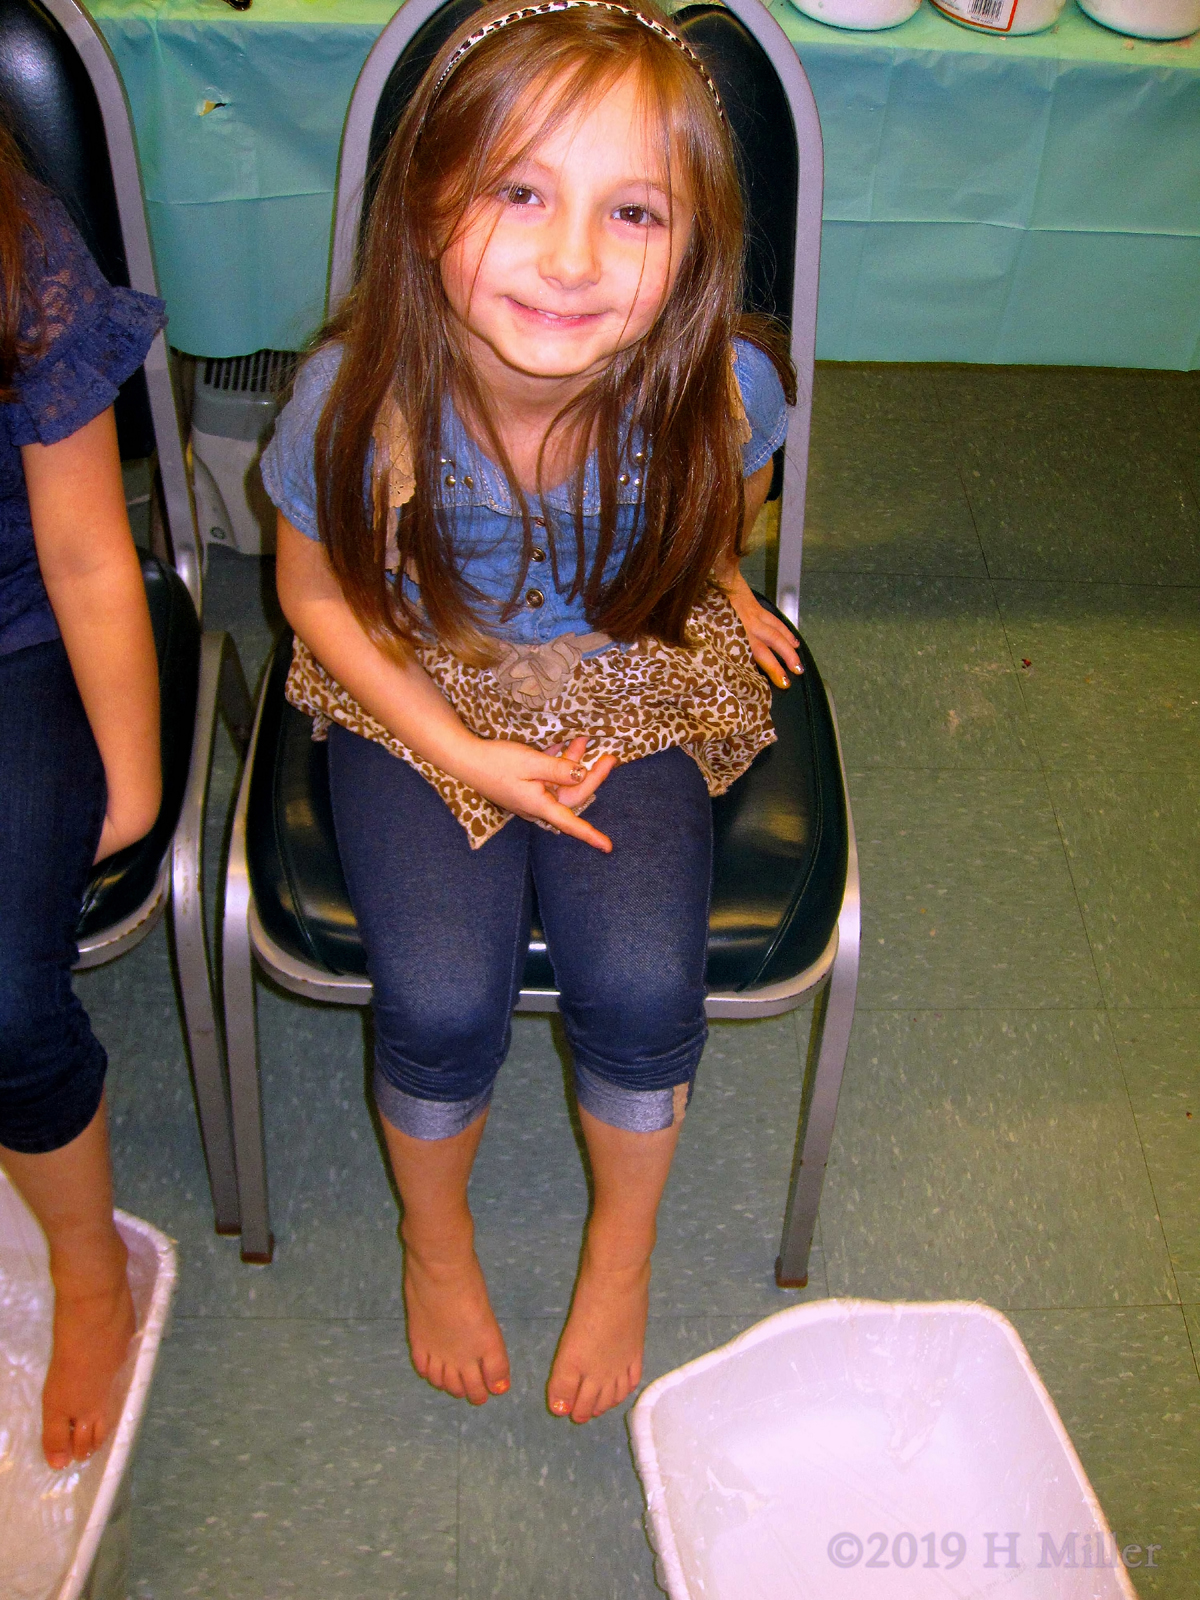 Party Goer Enjoying Her Manicure For Kids And Mini Pedi At The Spa Party 